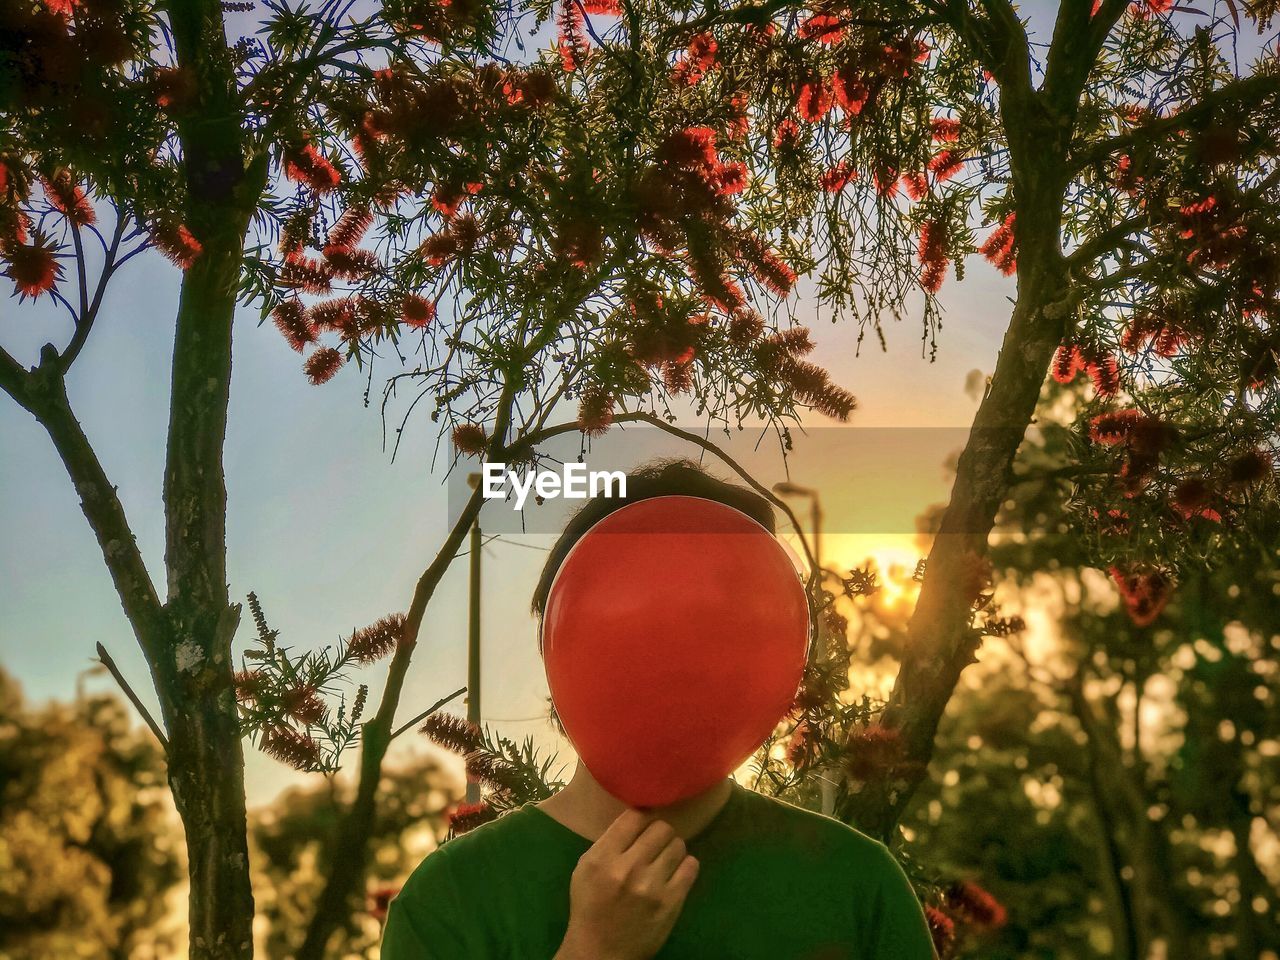 Man holding red balloon against flowering trees and sunset sky.